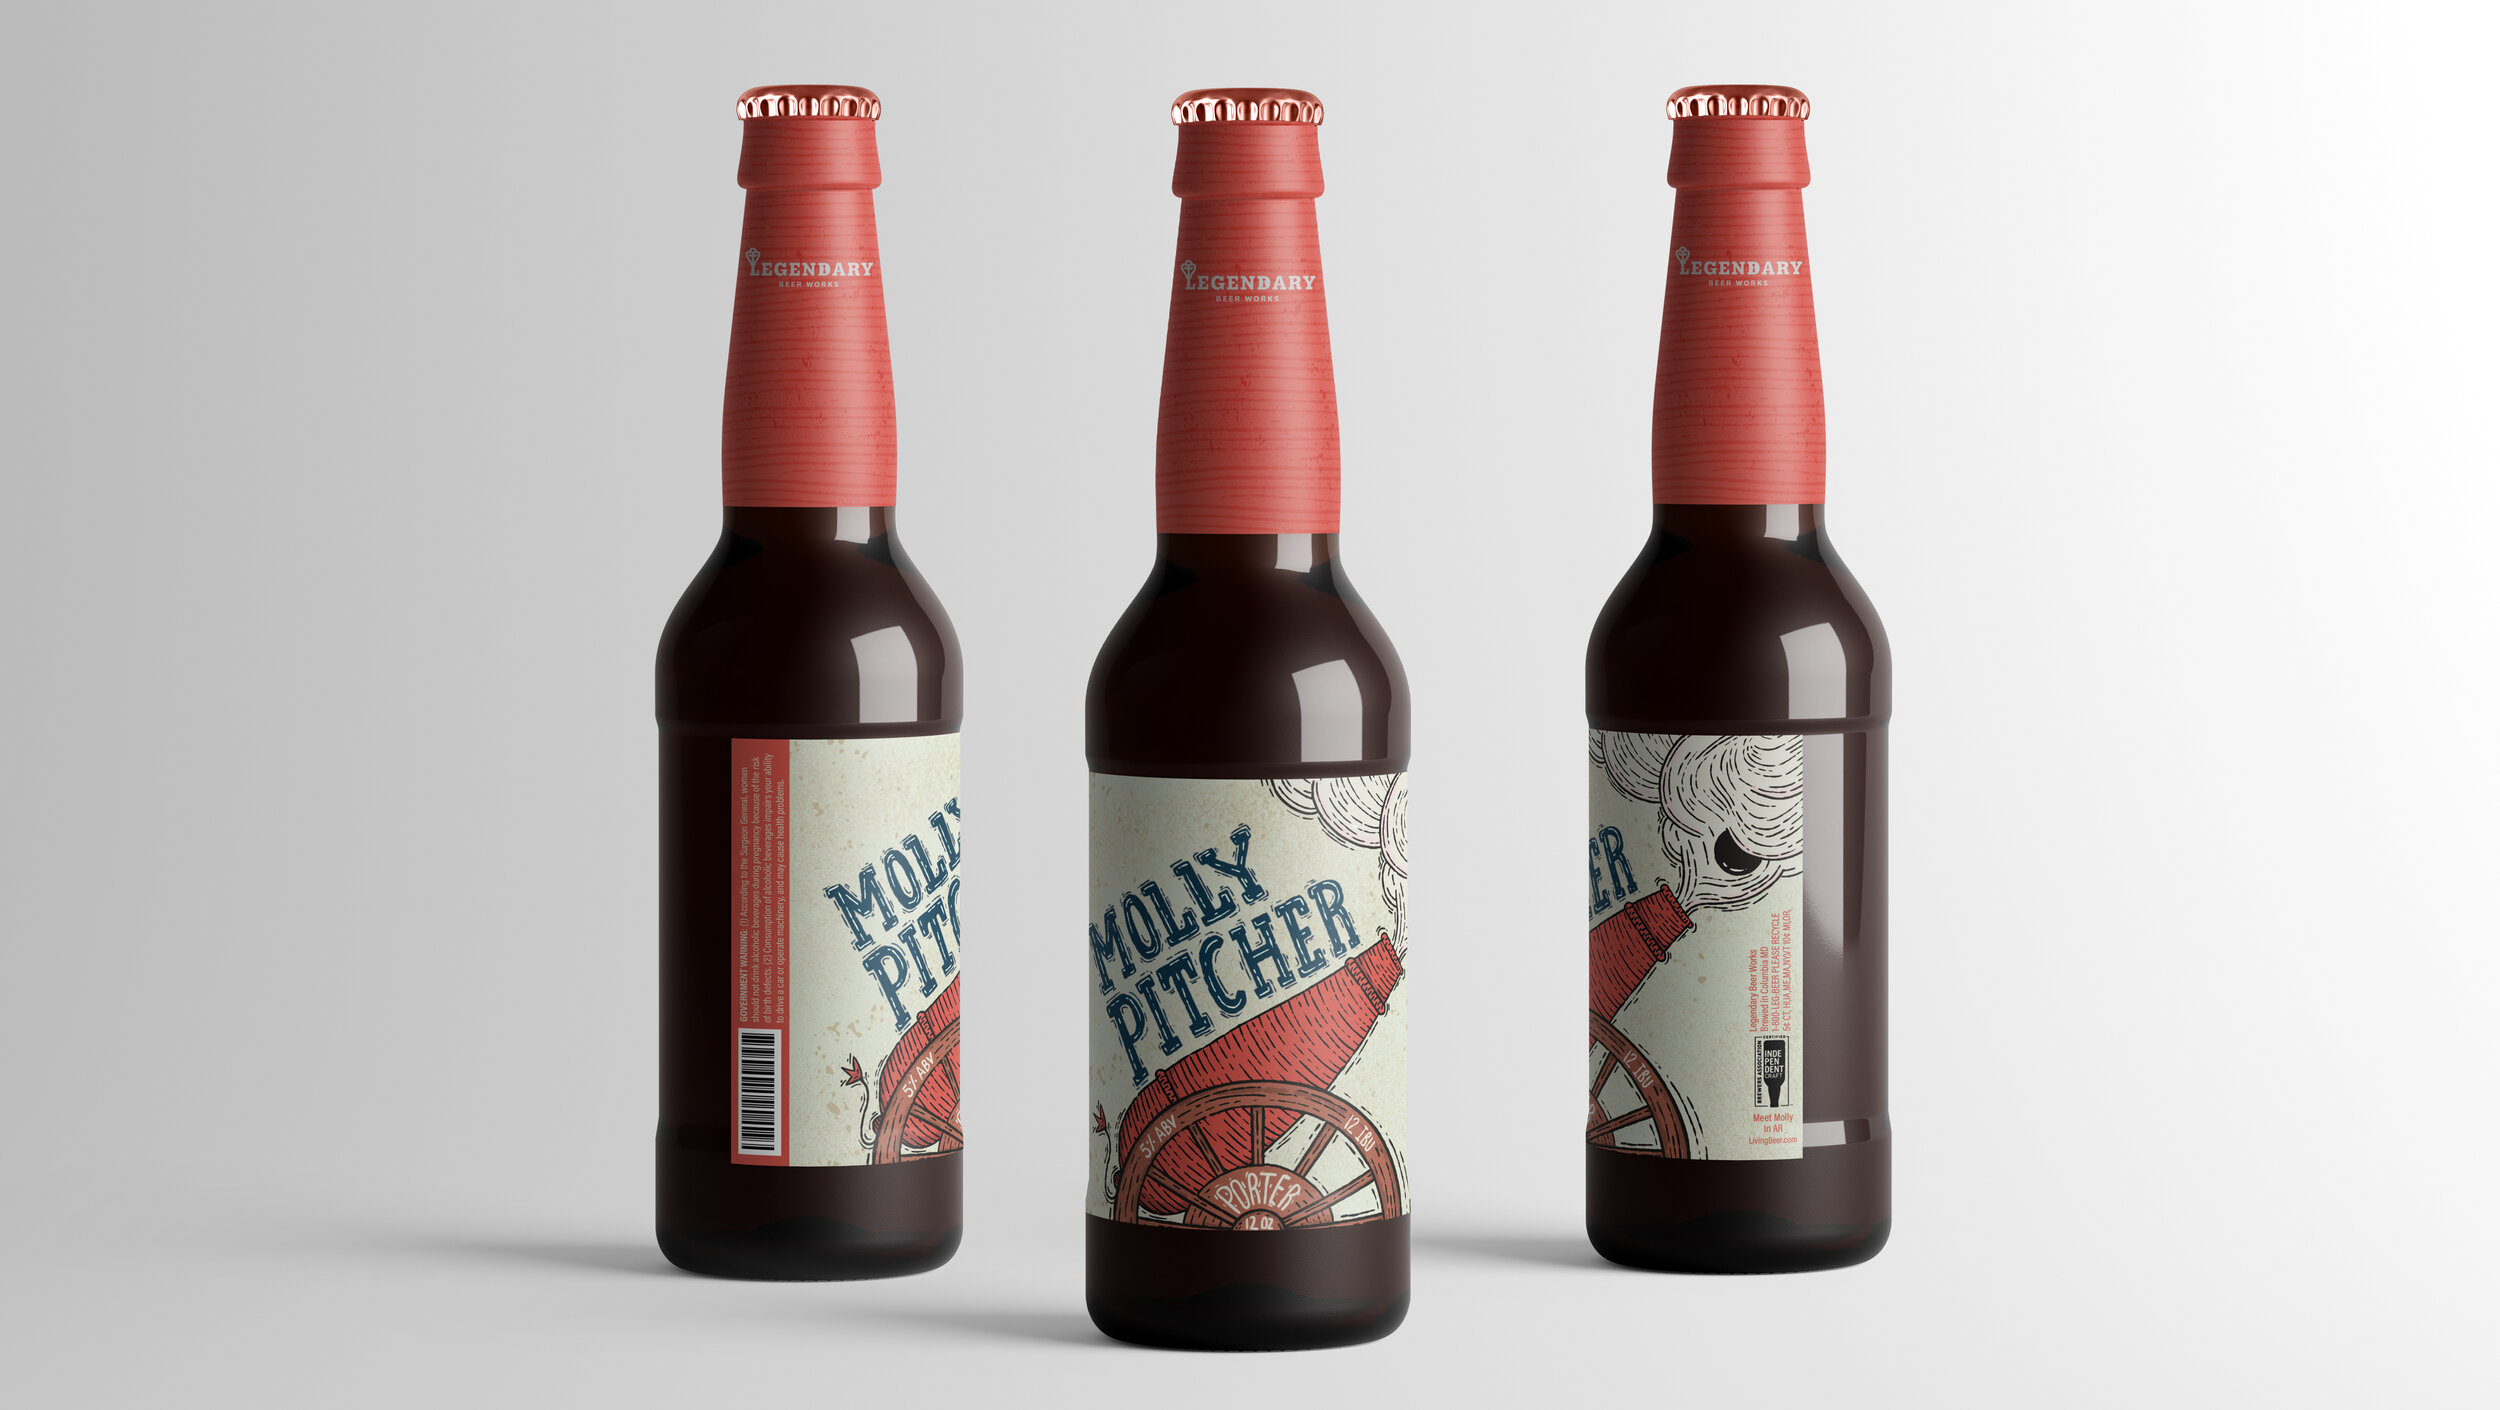 25 Molly Beers Images, Stock Photos, 3D objects, & Vectors